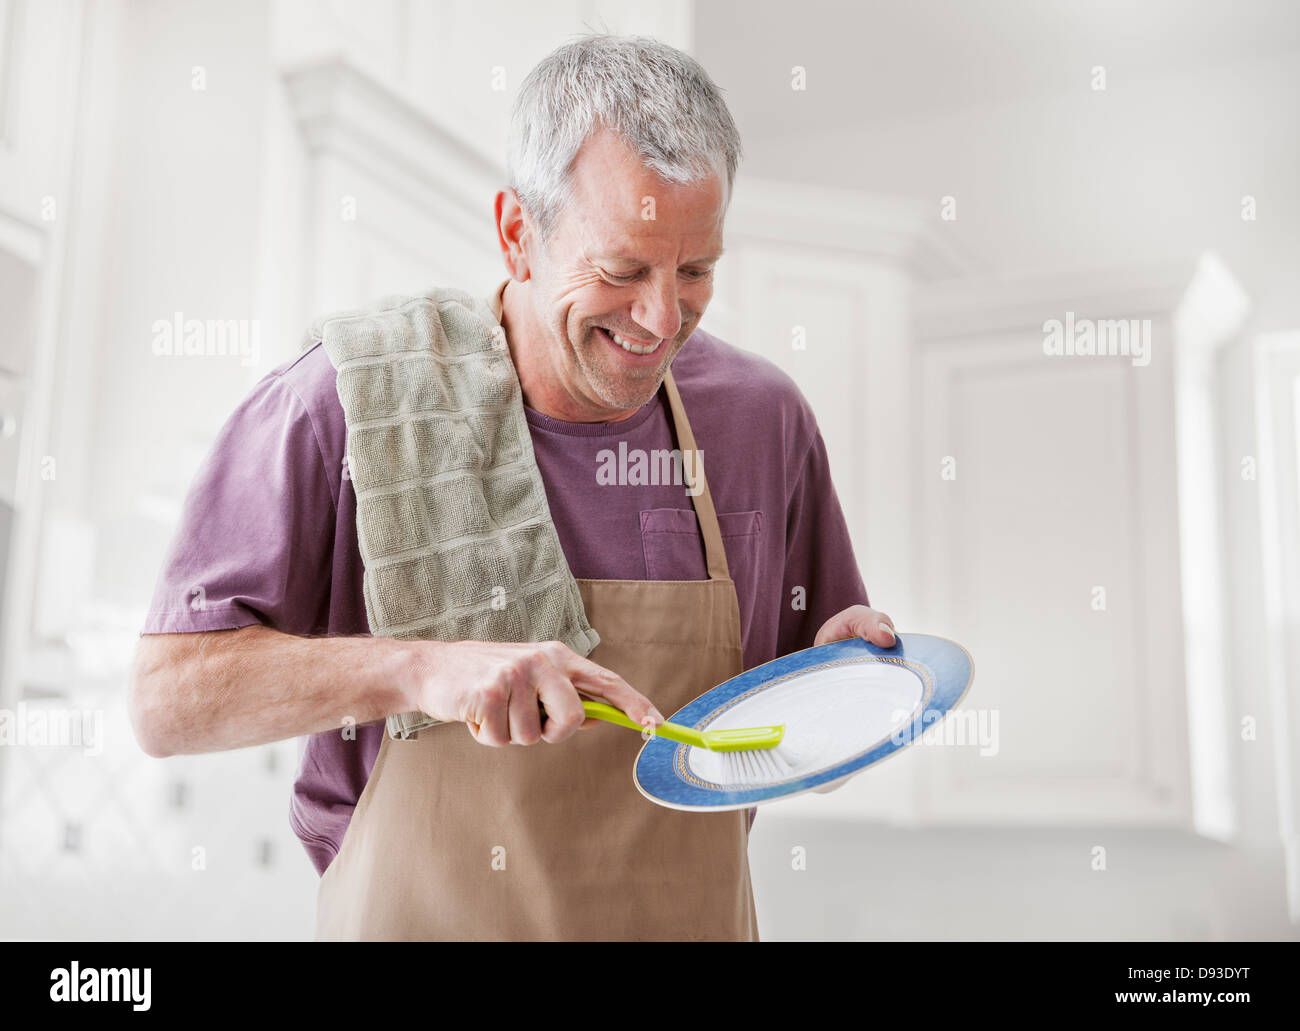 https://c8.alamy.com/comp/D93DYT/caucasian-man-washing-dishes-in-kitchen-D93DYT.jpg